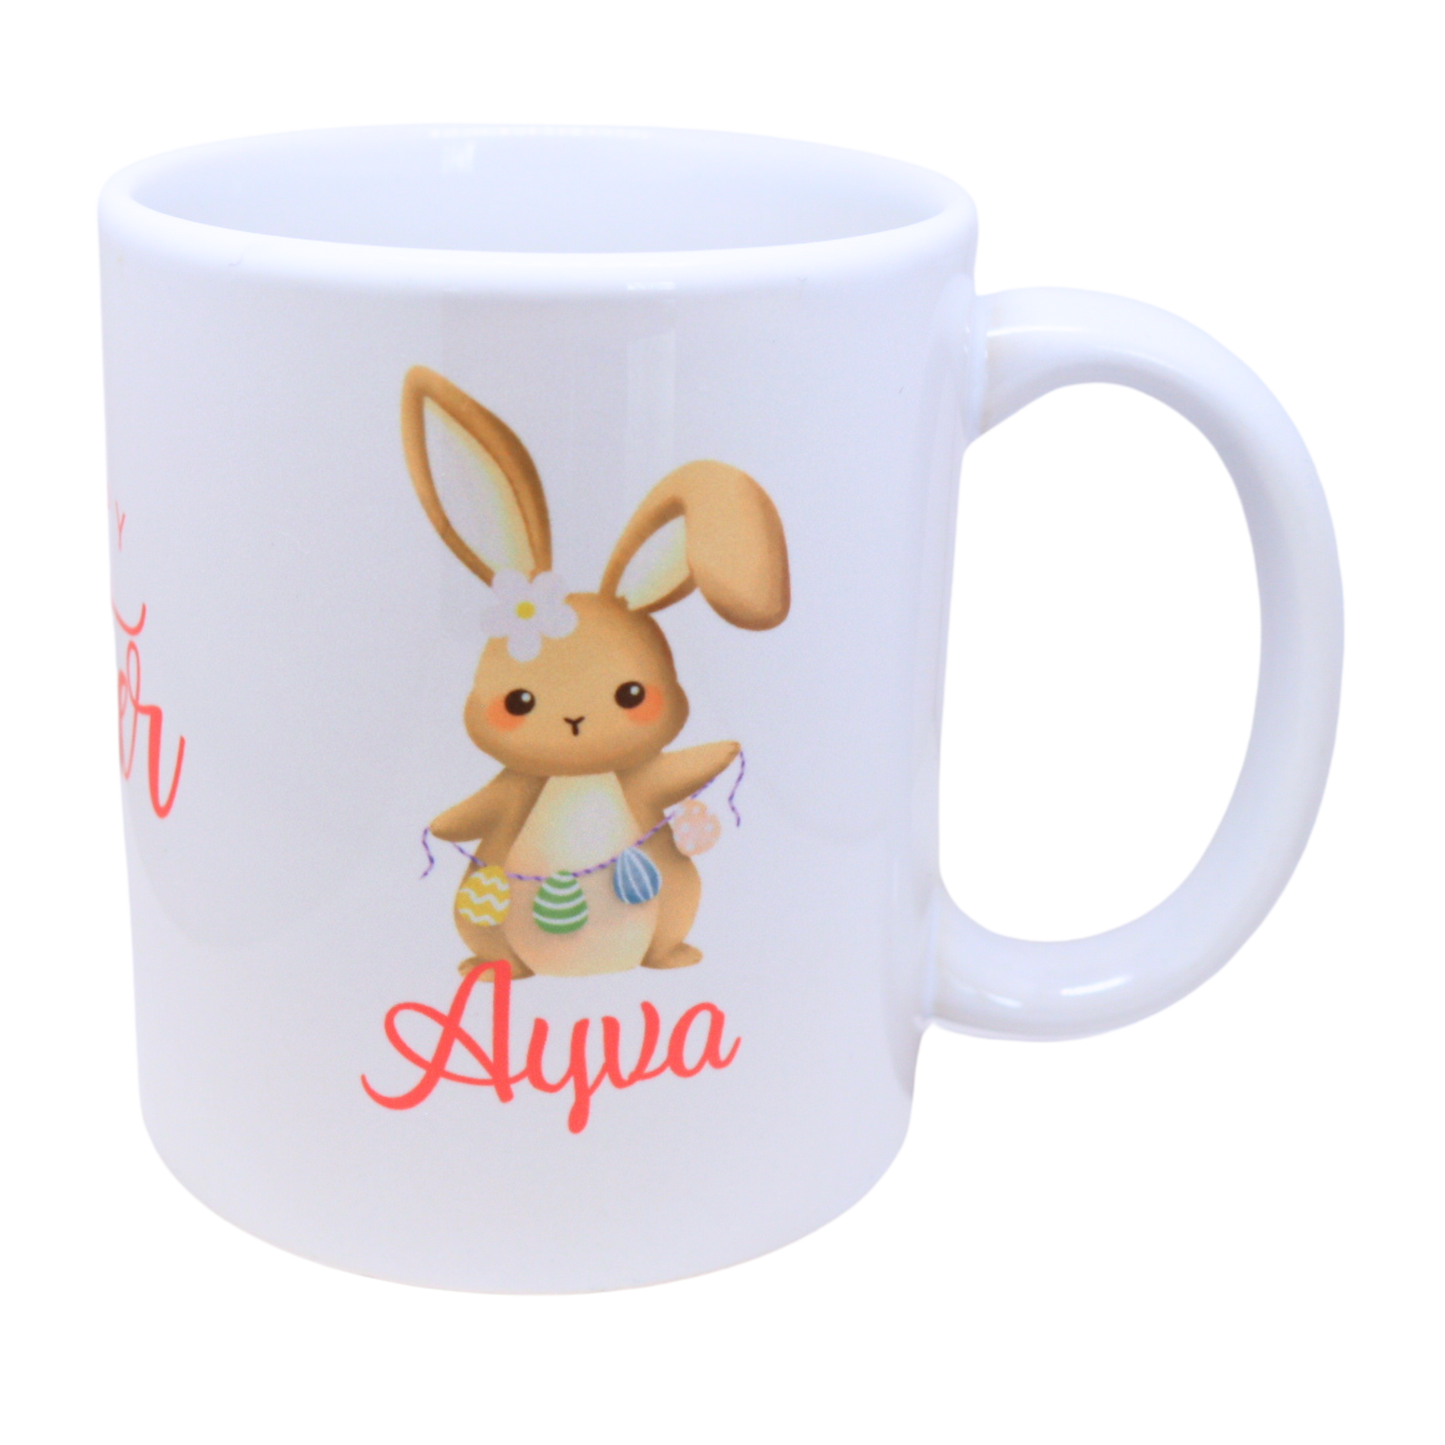 personalised easter mug. holds 325ml liquid. style is pink with bunny